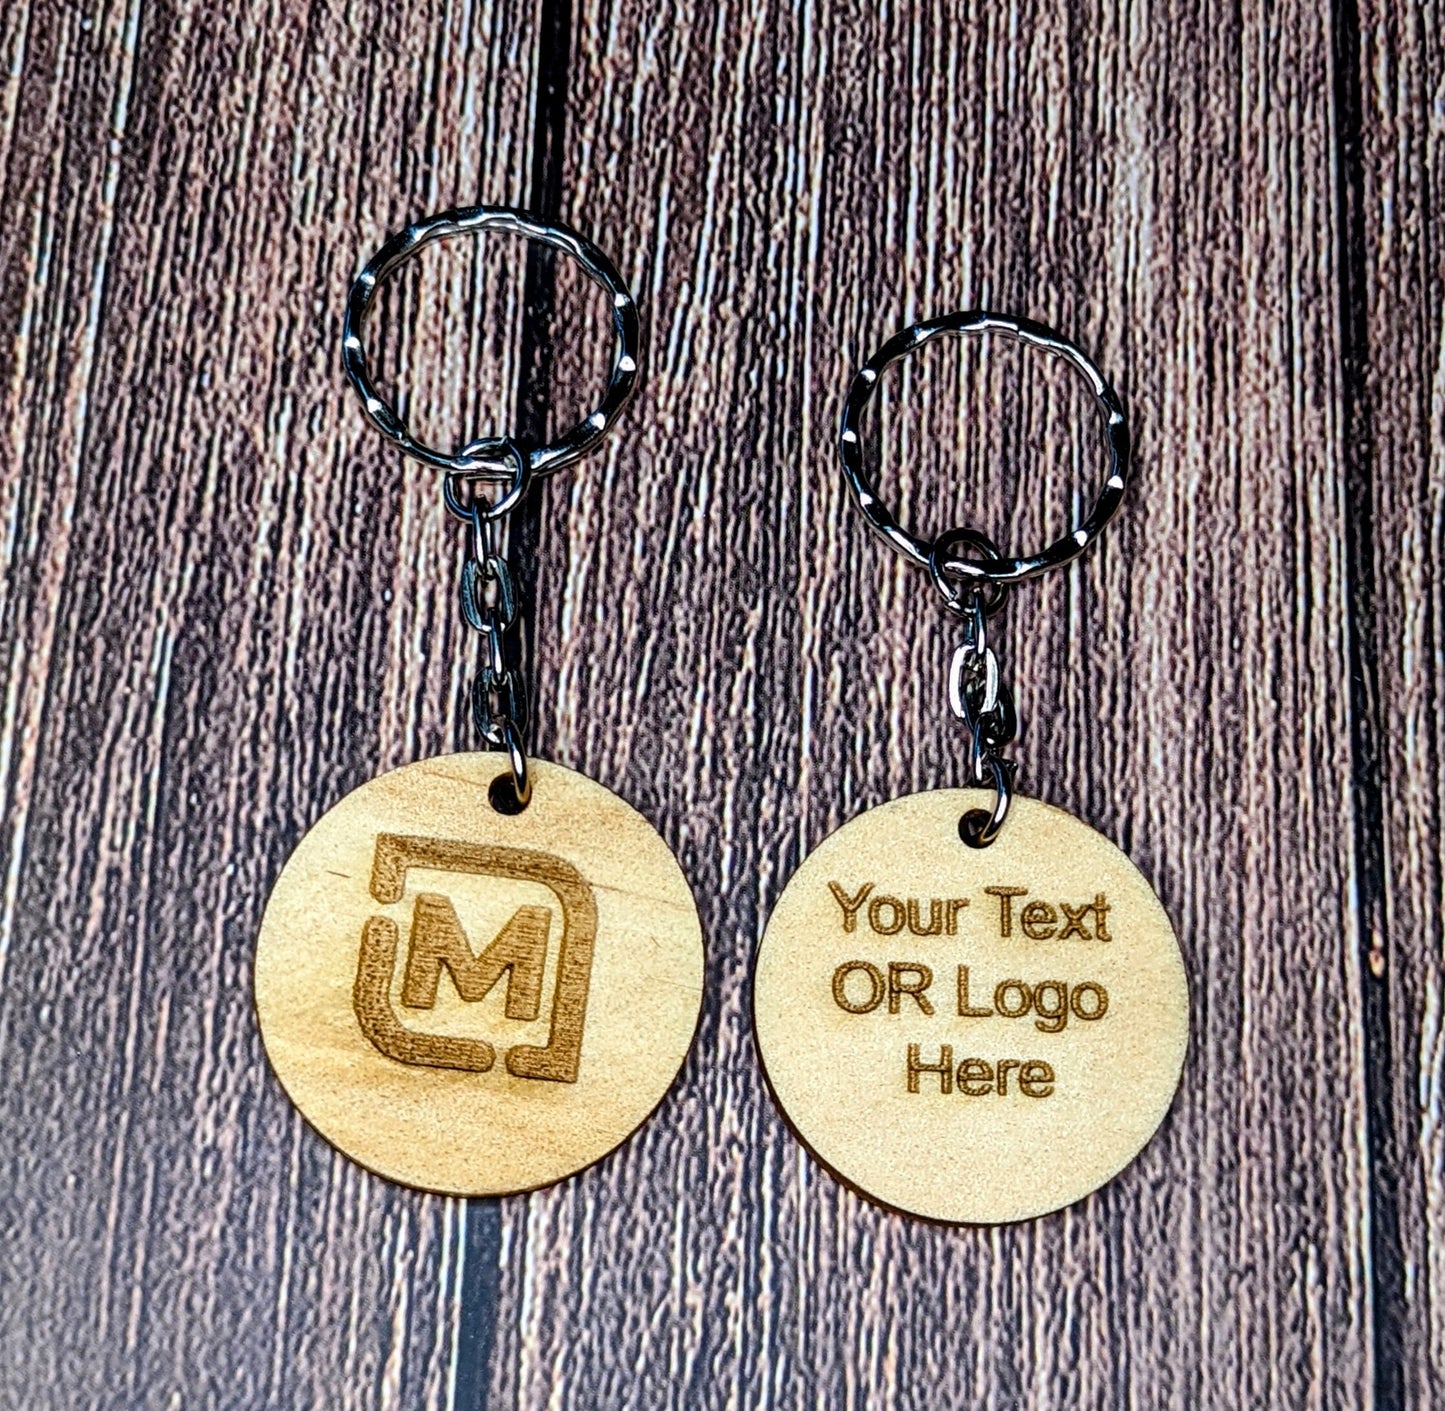 Personalised Brand Tags | Wooden Logo Swing Tags  | Bulk or Individual Order